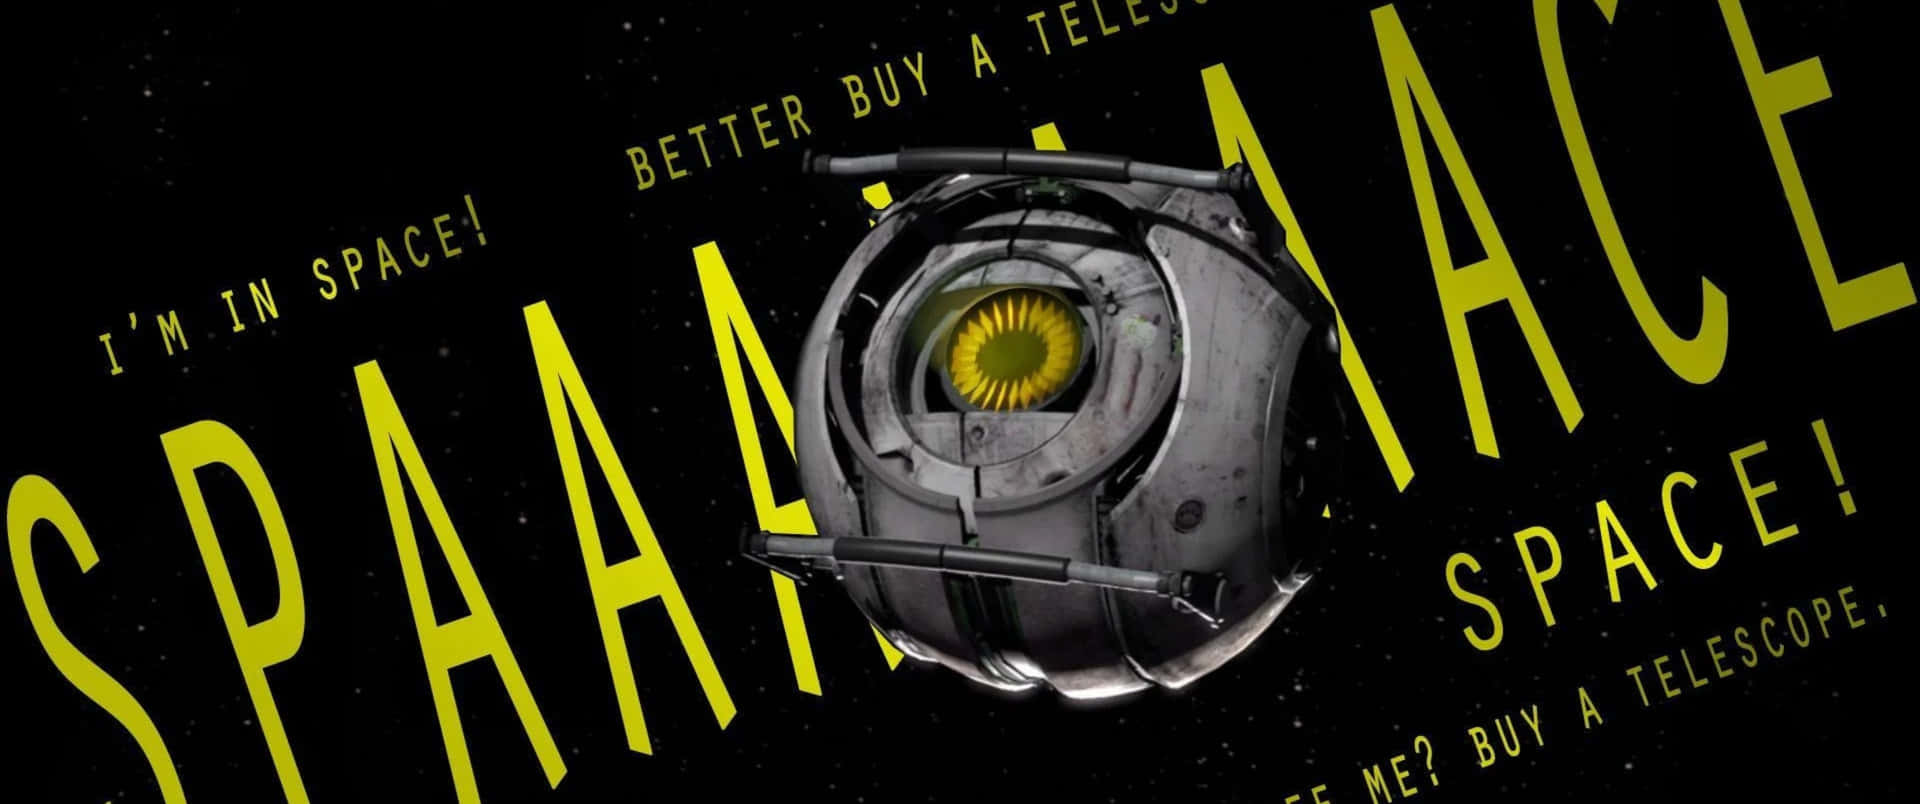 Spamaace Space - A Spacecraft With A Yellow And Black Background